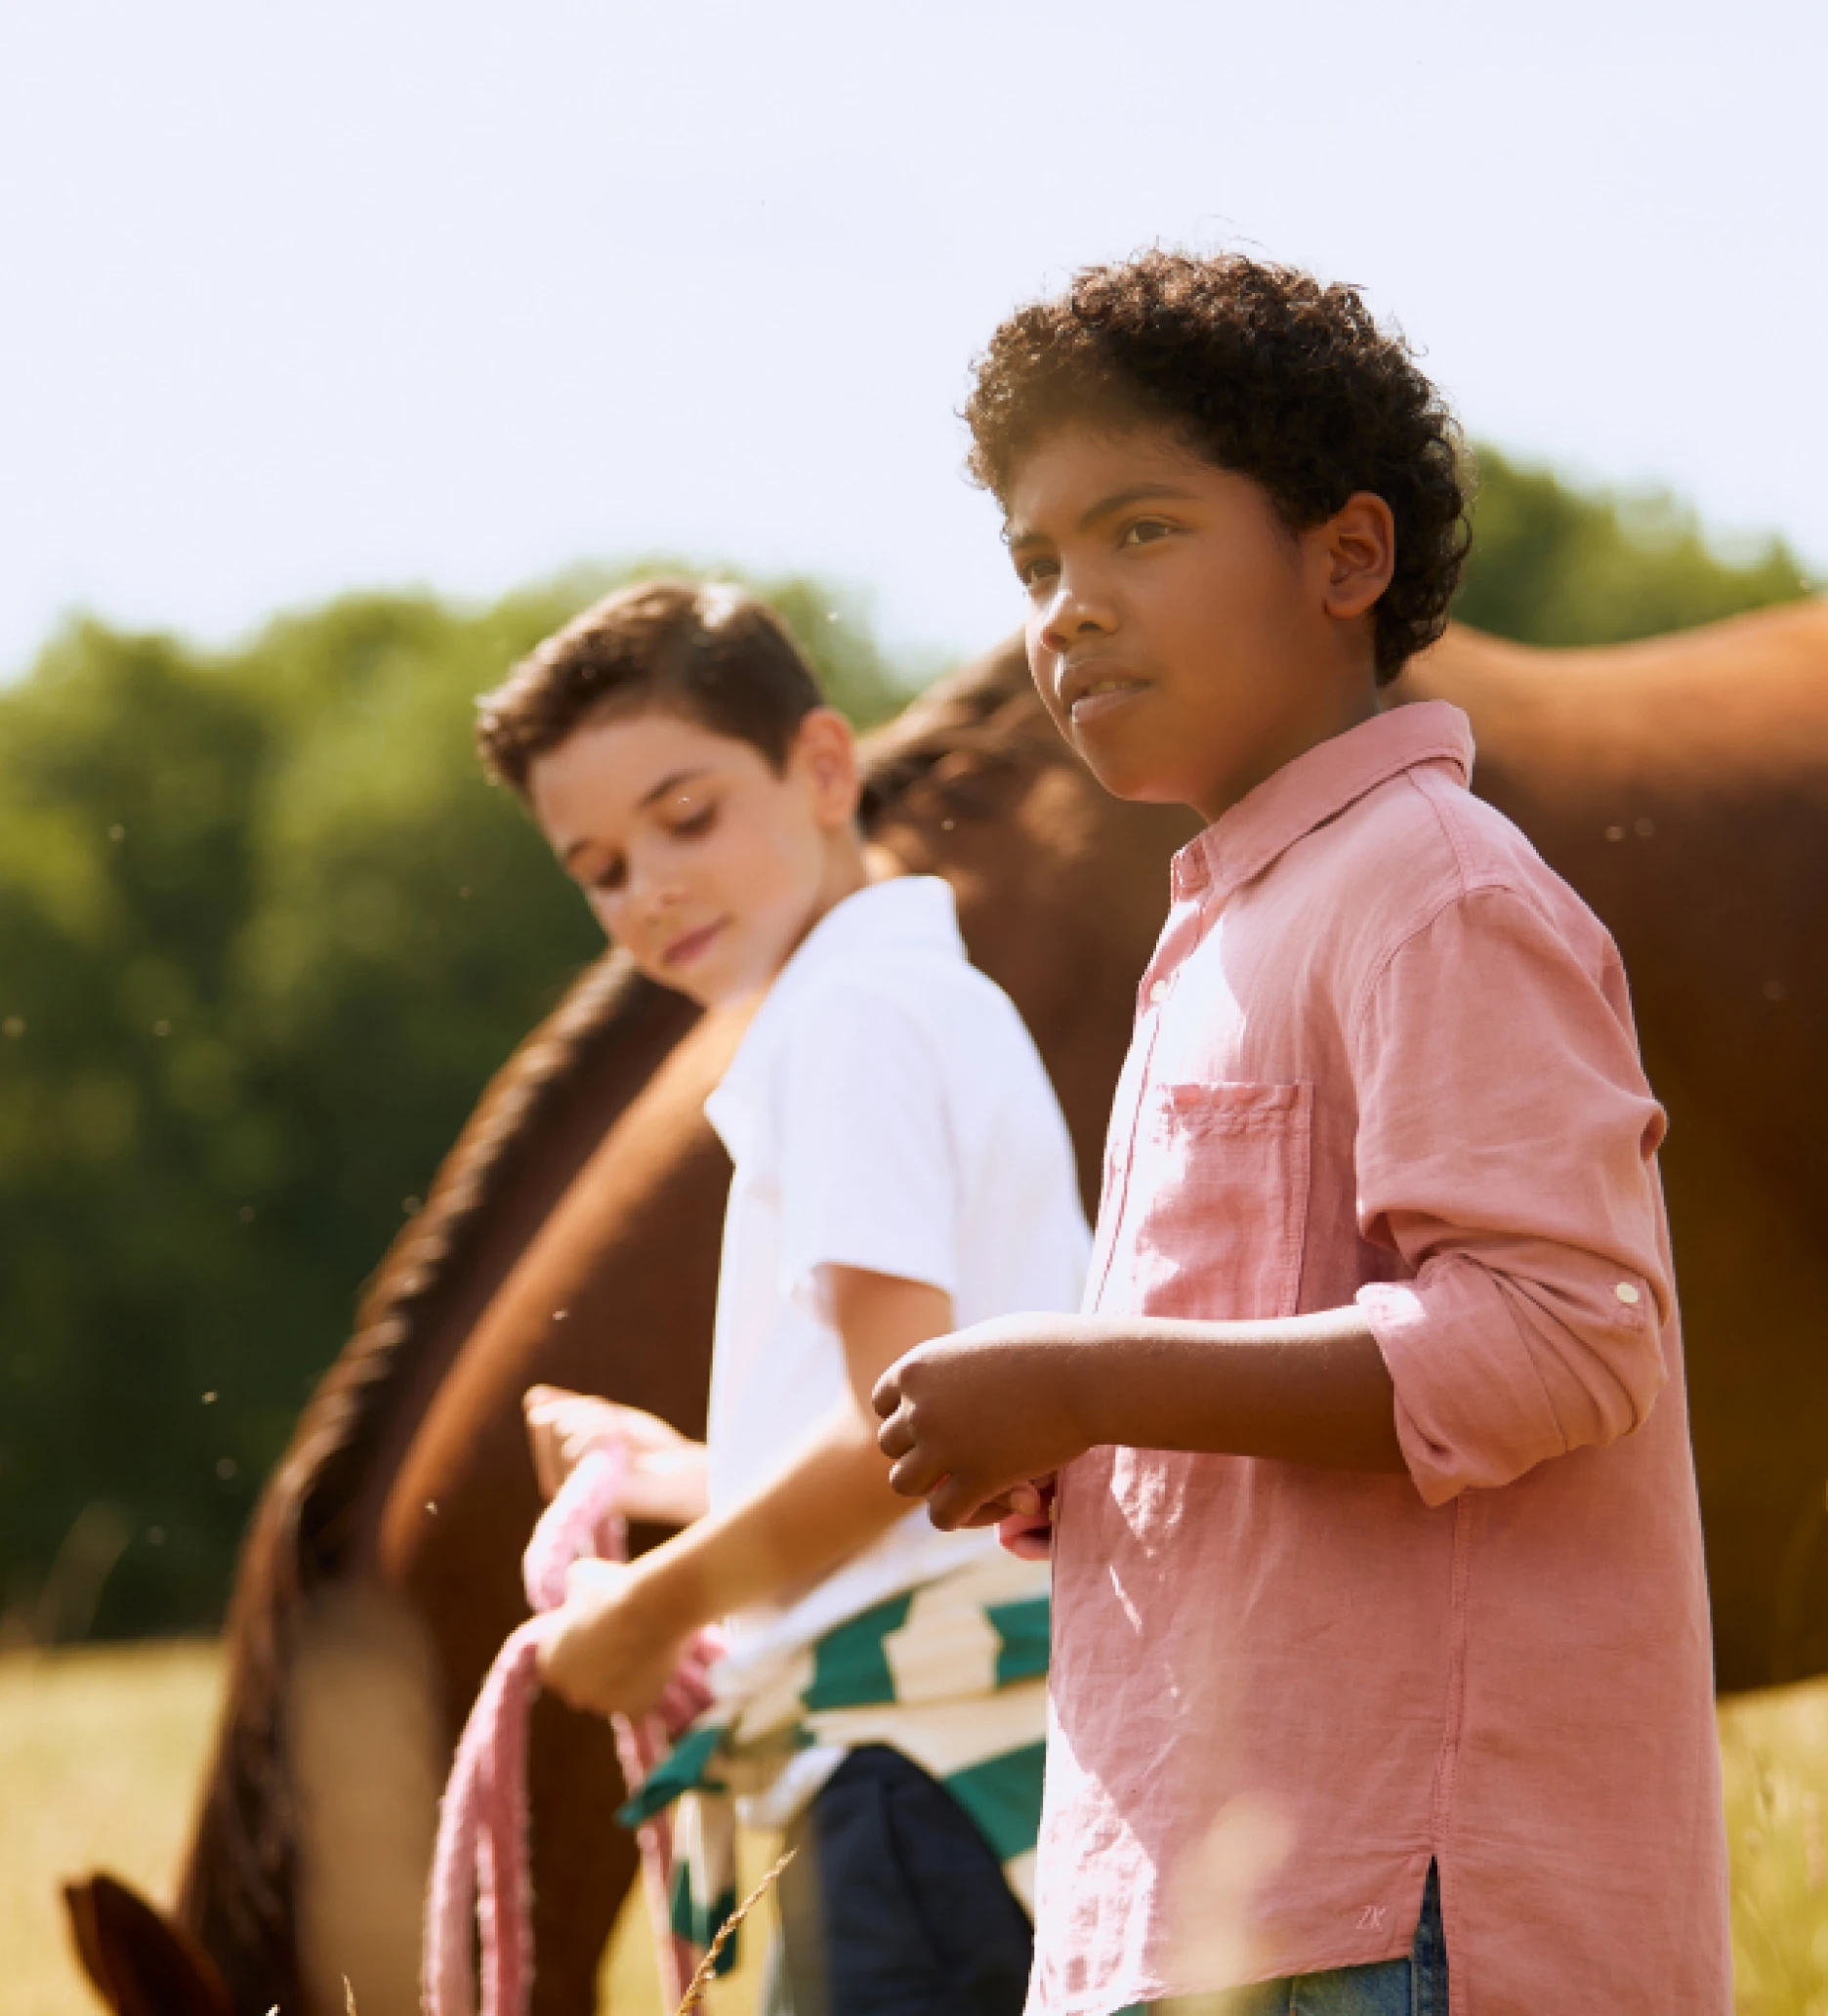 Two boys in a field with horse in background